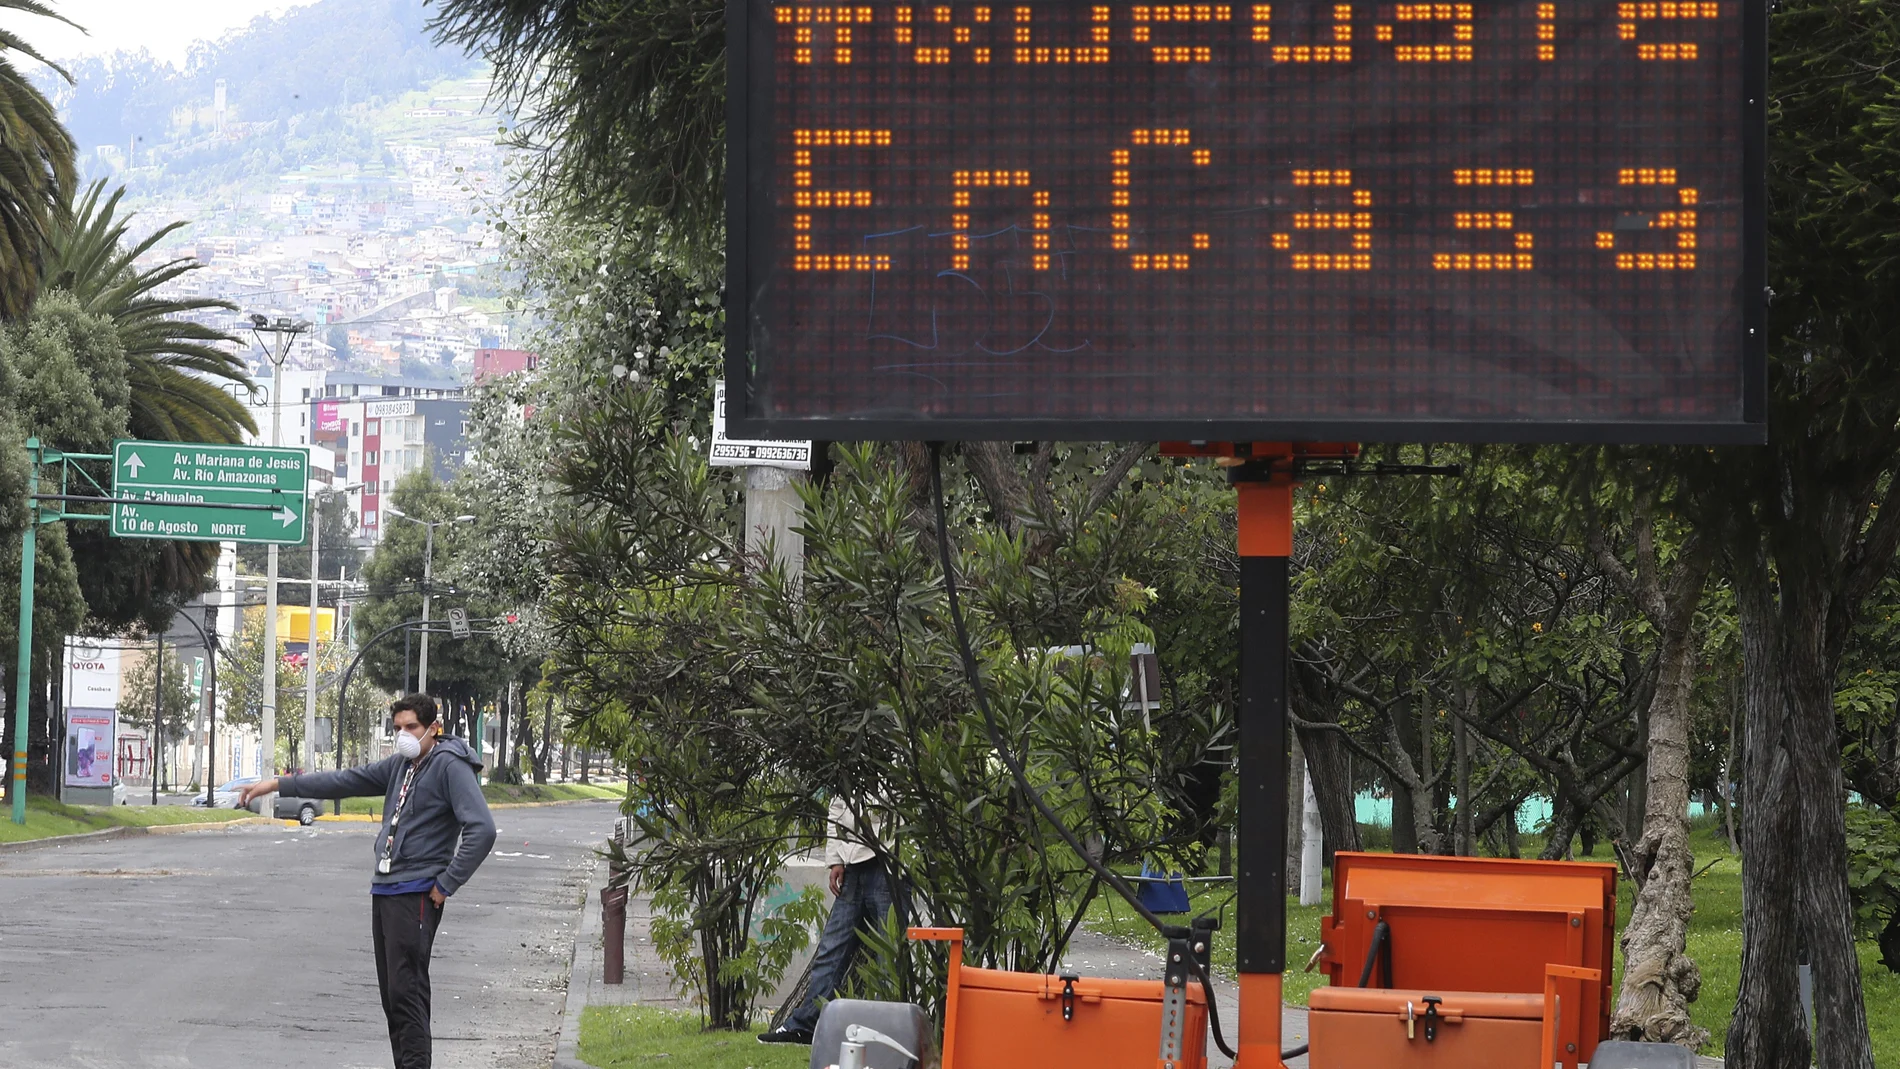 An electronic road sign reads in Spanish "Stay at home" where a man hails a cab in Quito, Ecuador, Thursday, March 19, 2020. The government is restricting movement to those who provide basic services, is enforcing a curfew, and closing schools, to help contain the spread of the new coronavirus. (AP Photo/Dolores Ochoa)